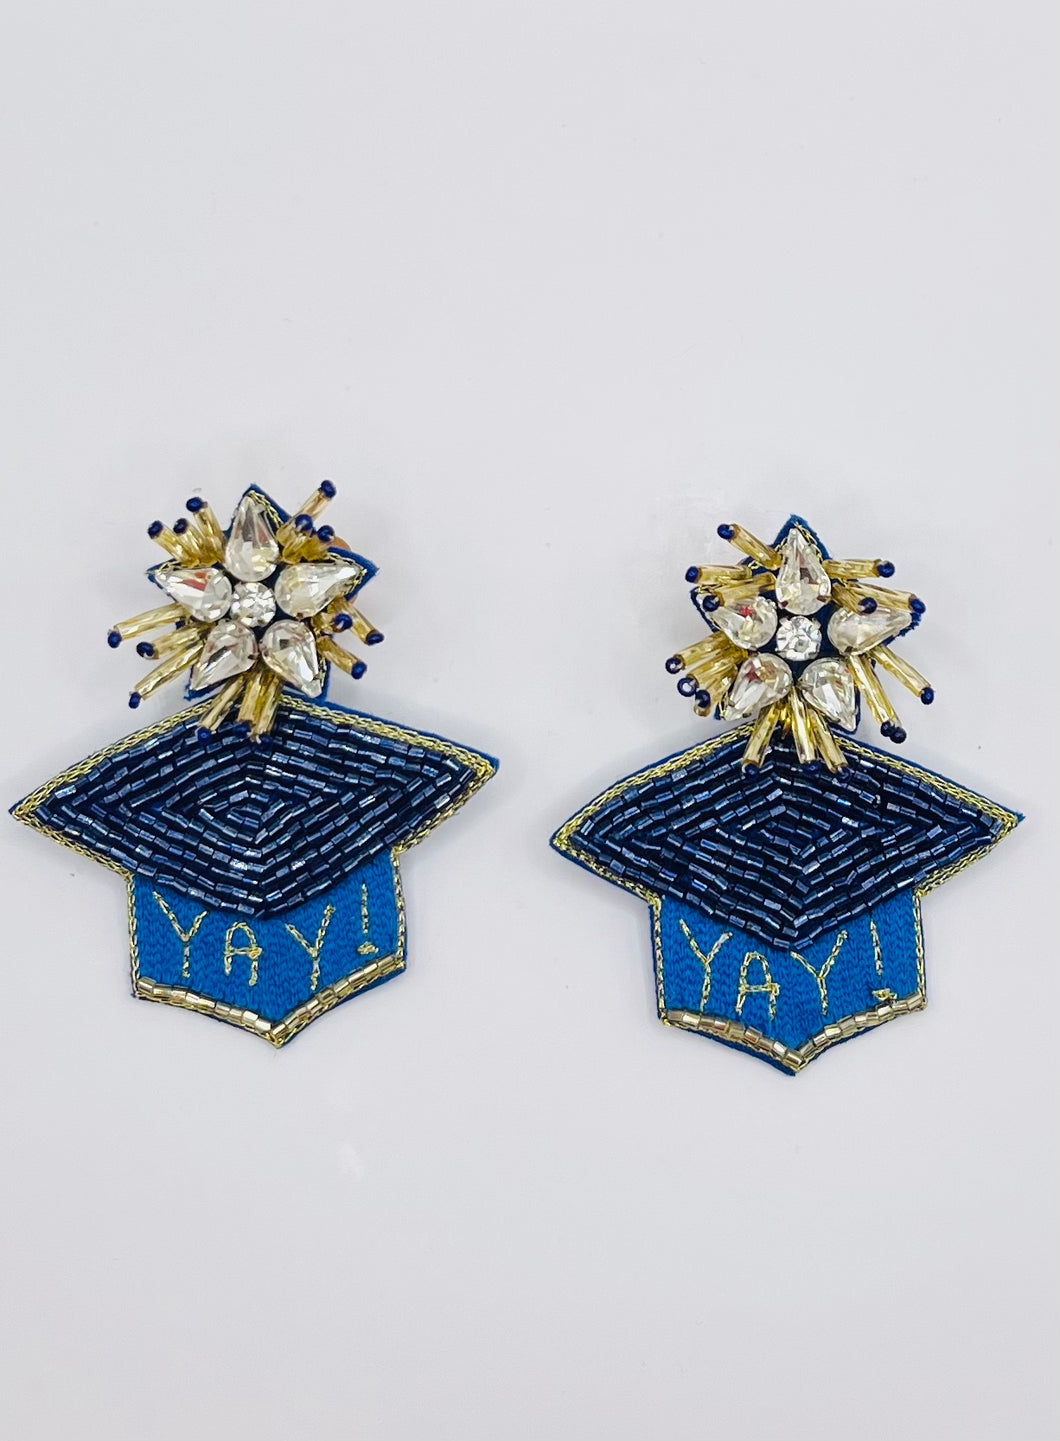 Graduation Cap Earrings  Blue and Gold Beaded “Yay!”/ blue and gold/ college/ high school/ Spring